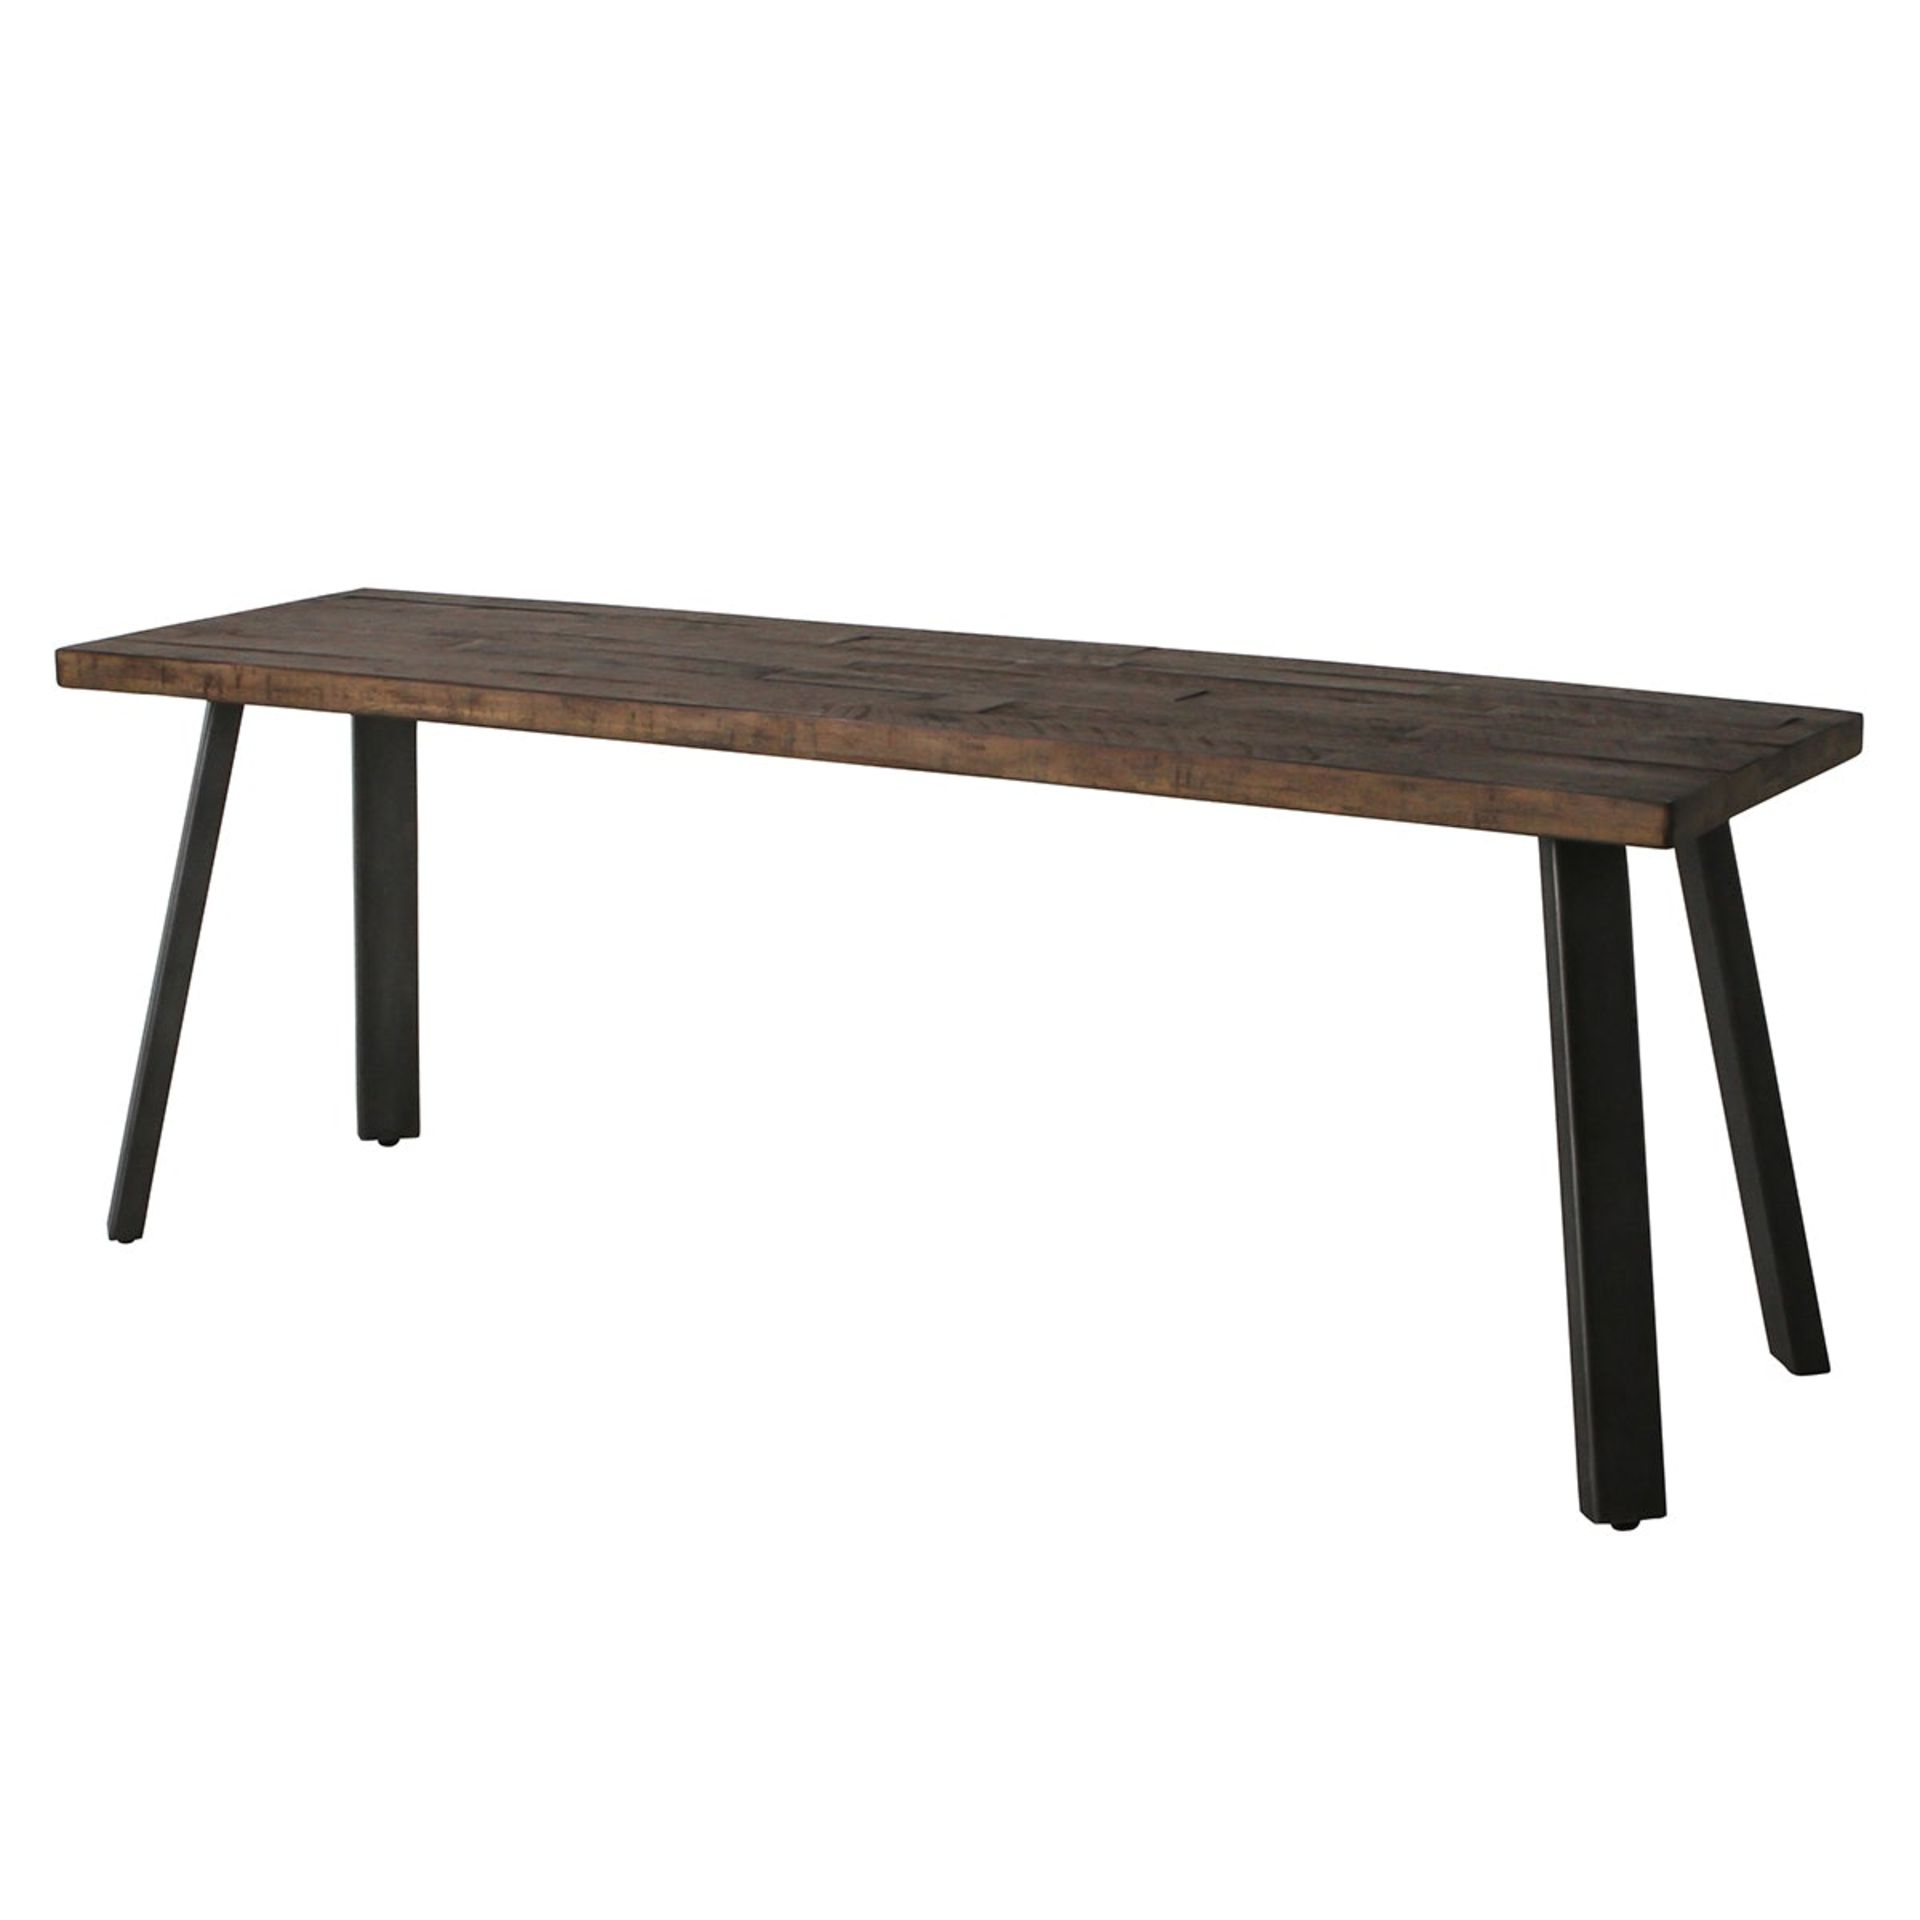 Camden Dining bench The Camden Dining Bench - Rustic is the perfect touch to add in your home if you - Image 2 of 2